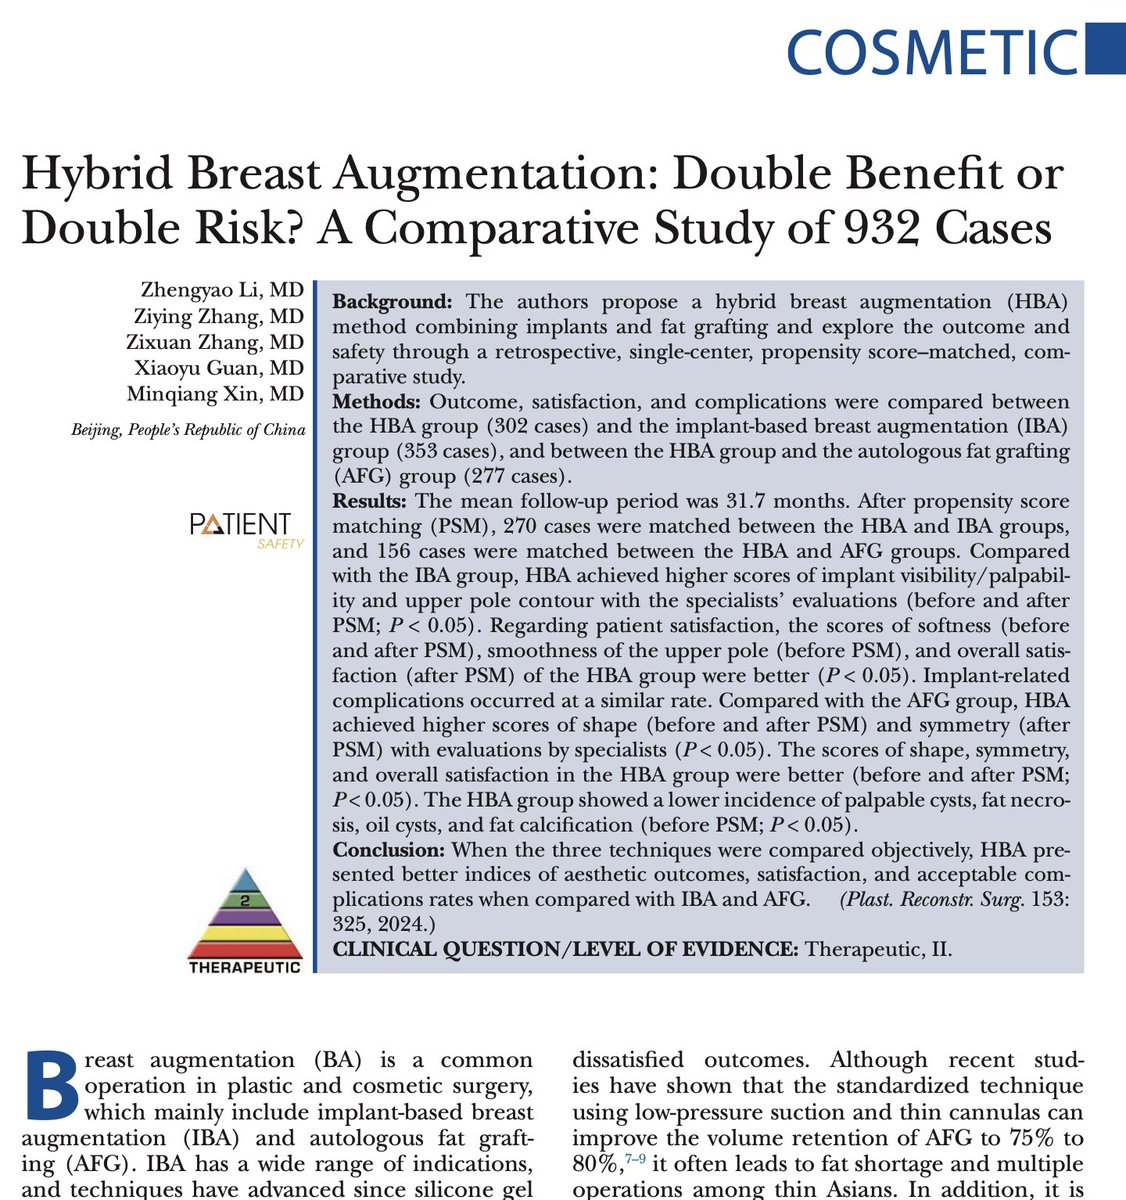 Use of fat grafting to mask breast implant contour achieved better aesthetic outcomes in Asian women, who often have tight skin envelop and constricted lower poles. Who says high level scientific studies cannot be done in cosmetic surgery? Impressive work. bit.ly/3Hzk4V4